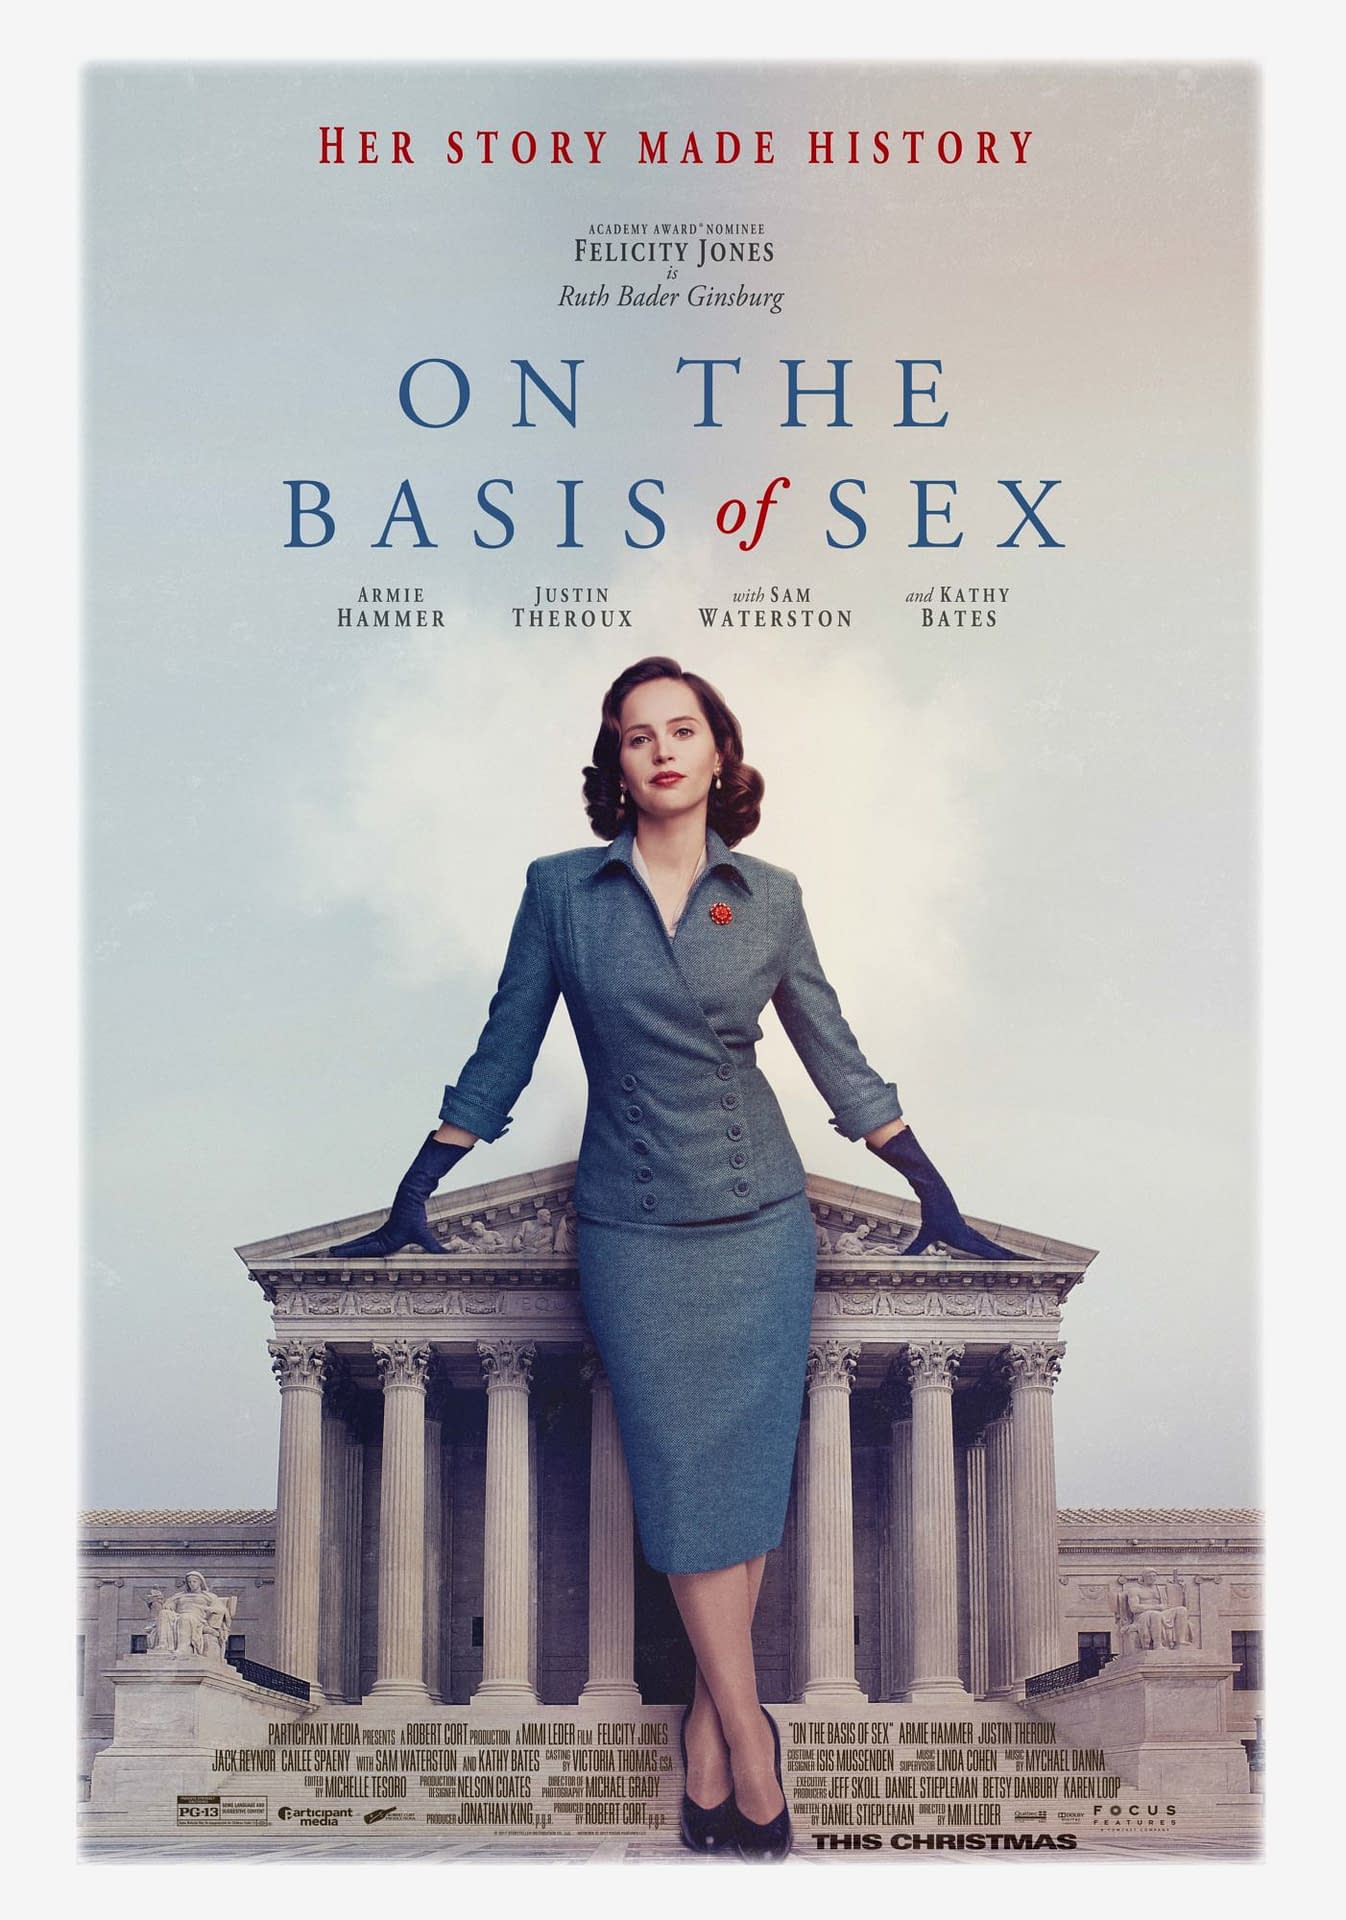 First Trailer and Poster for Ruth Bader Ginsburg Biopic 'On the Basis of Sex'